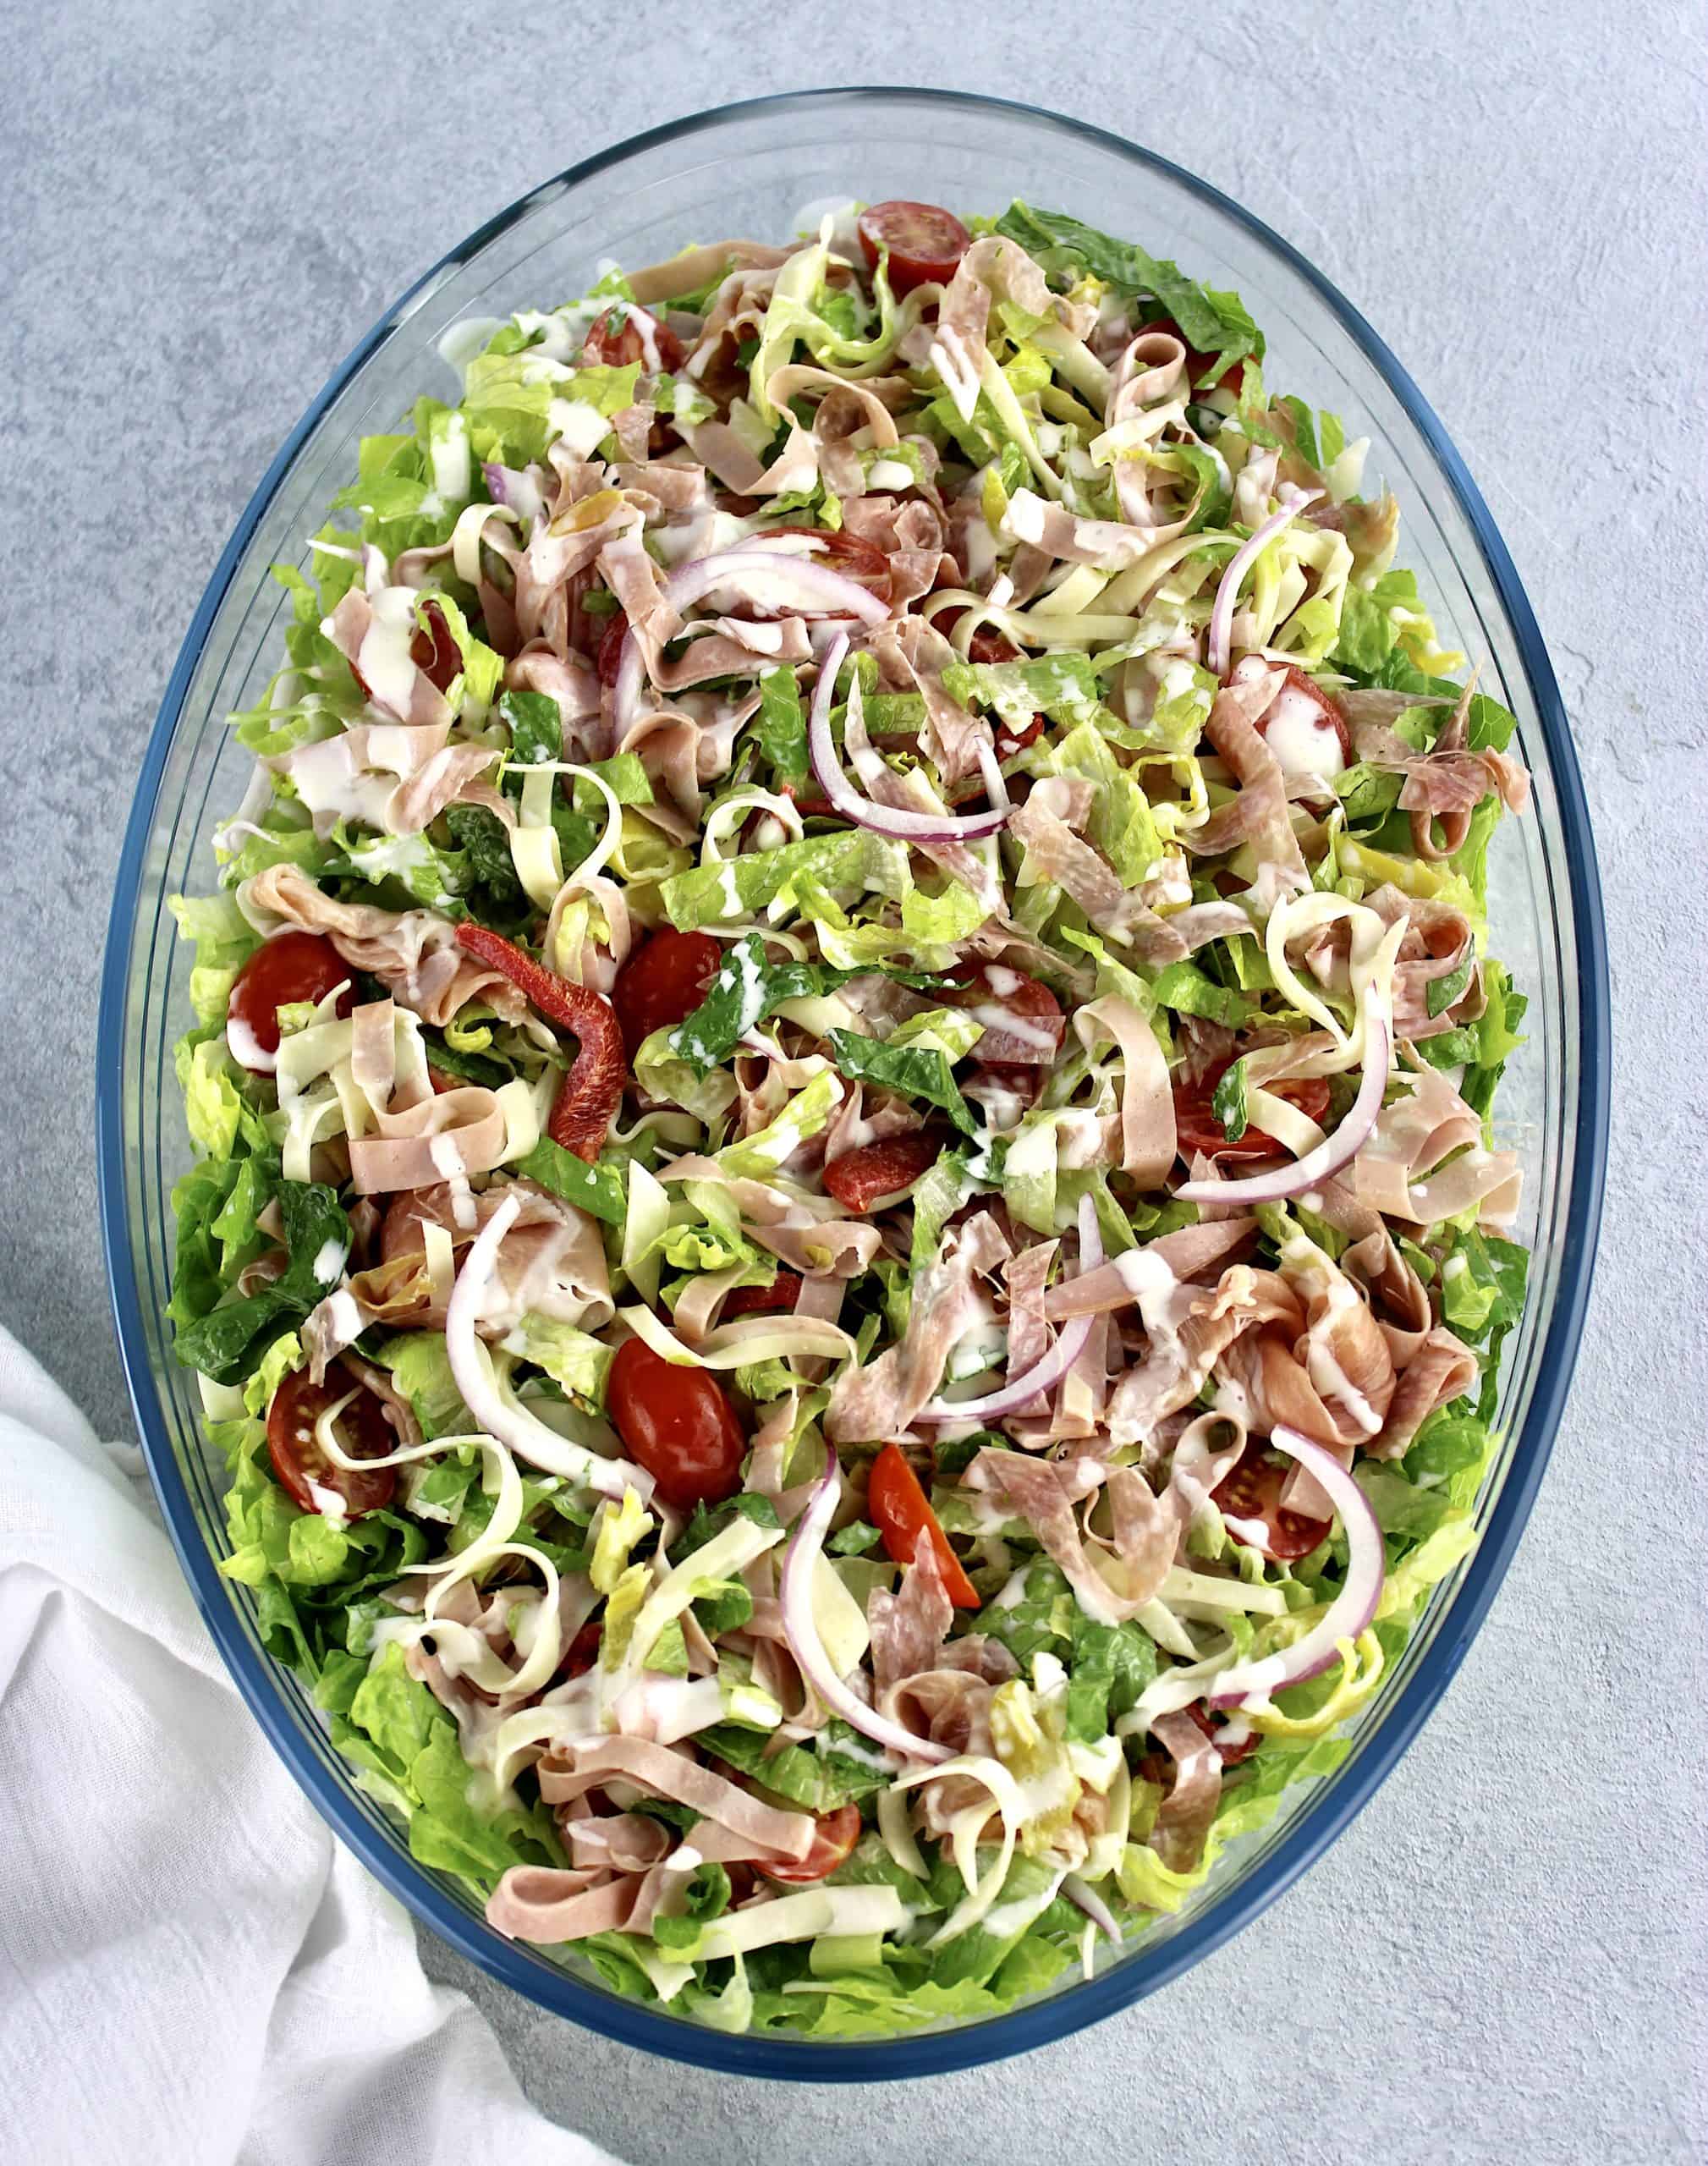 Grinder Salad that's been tossed in oval glass bowl with dressing on top